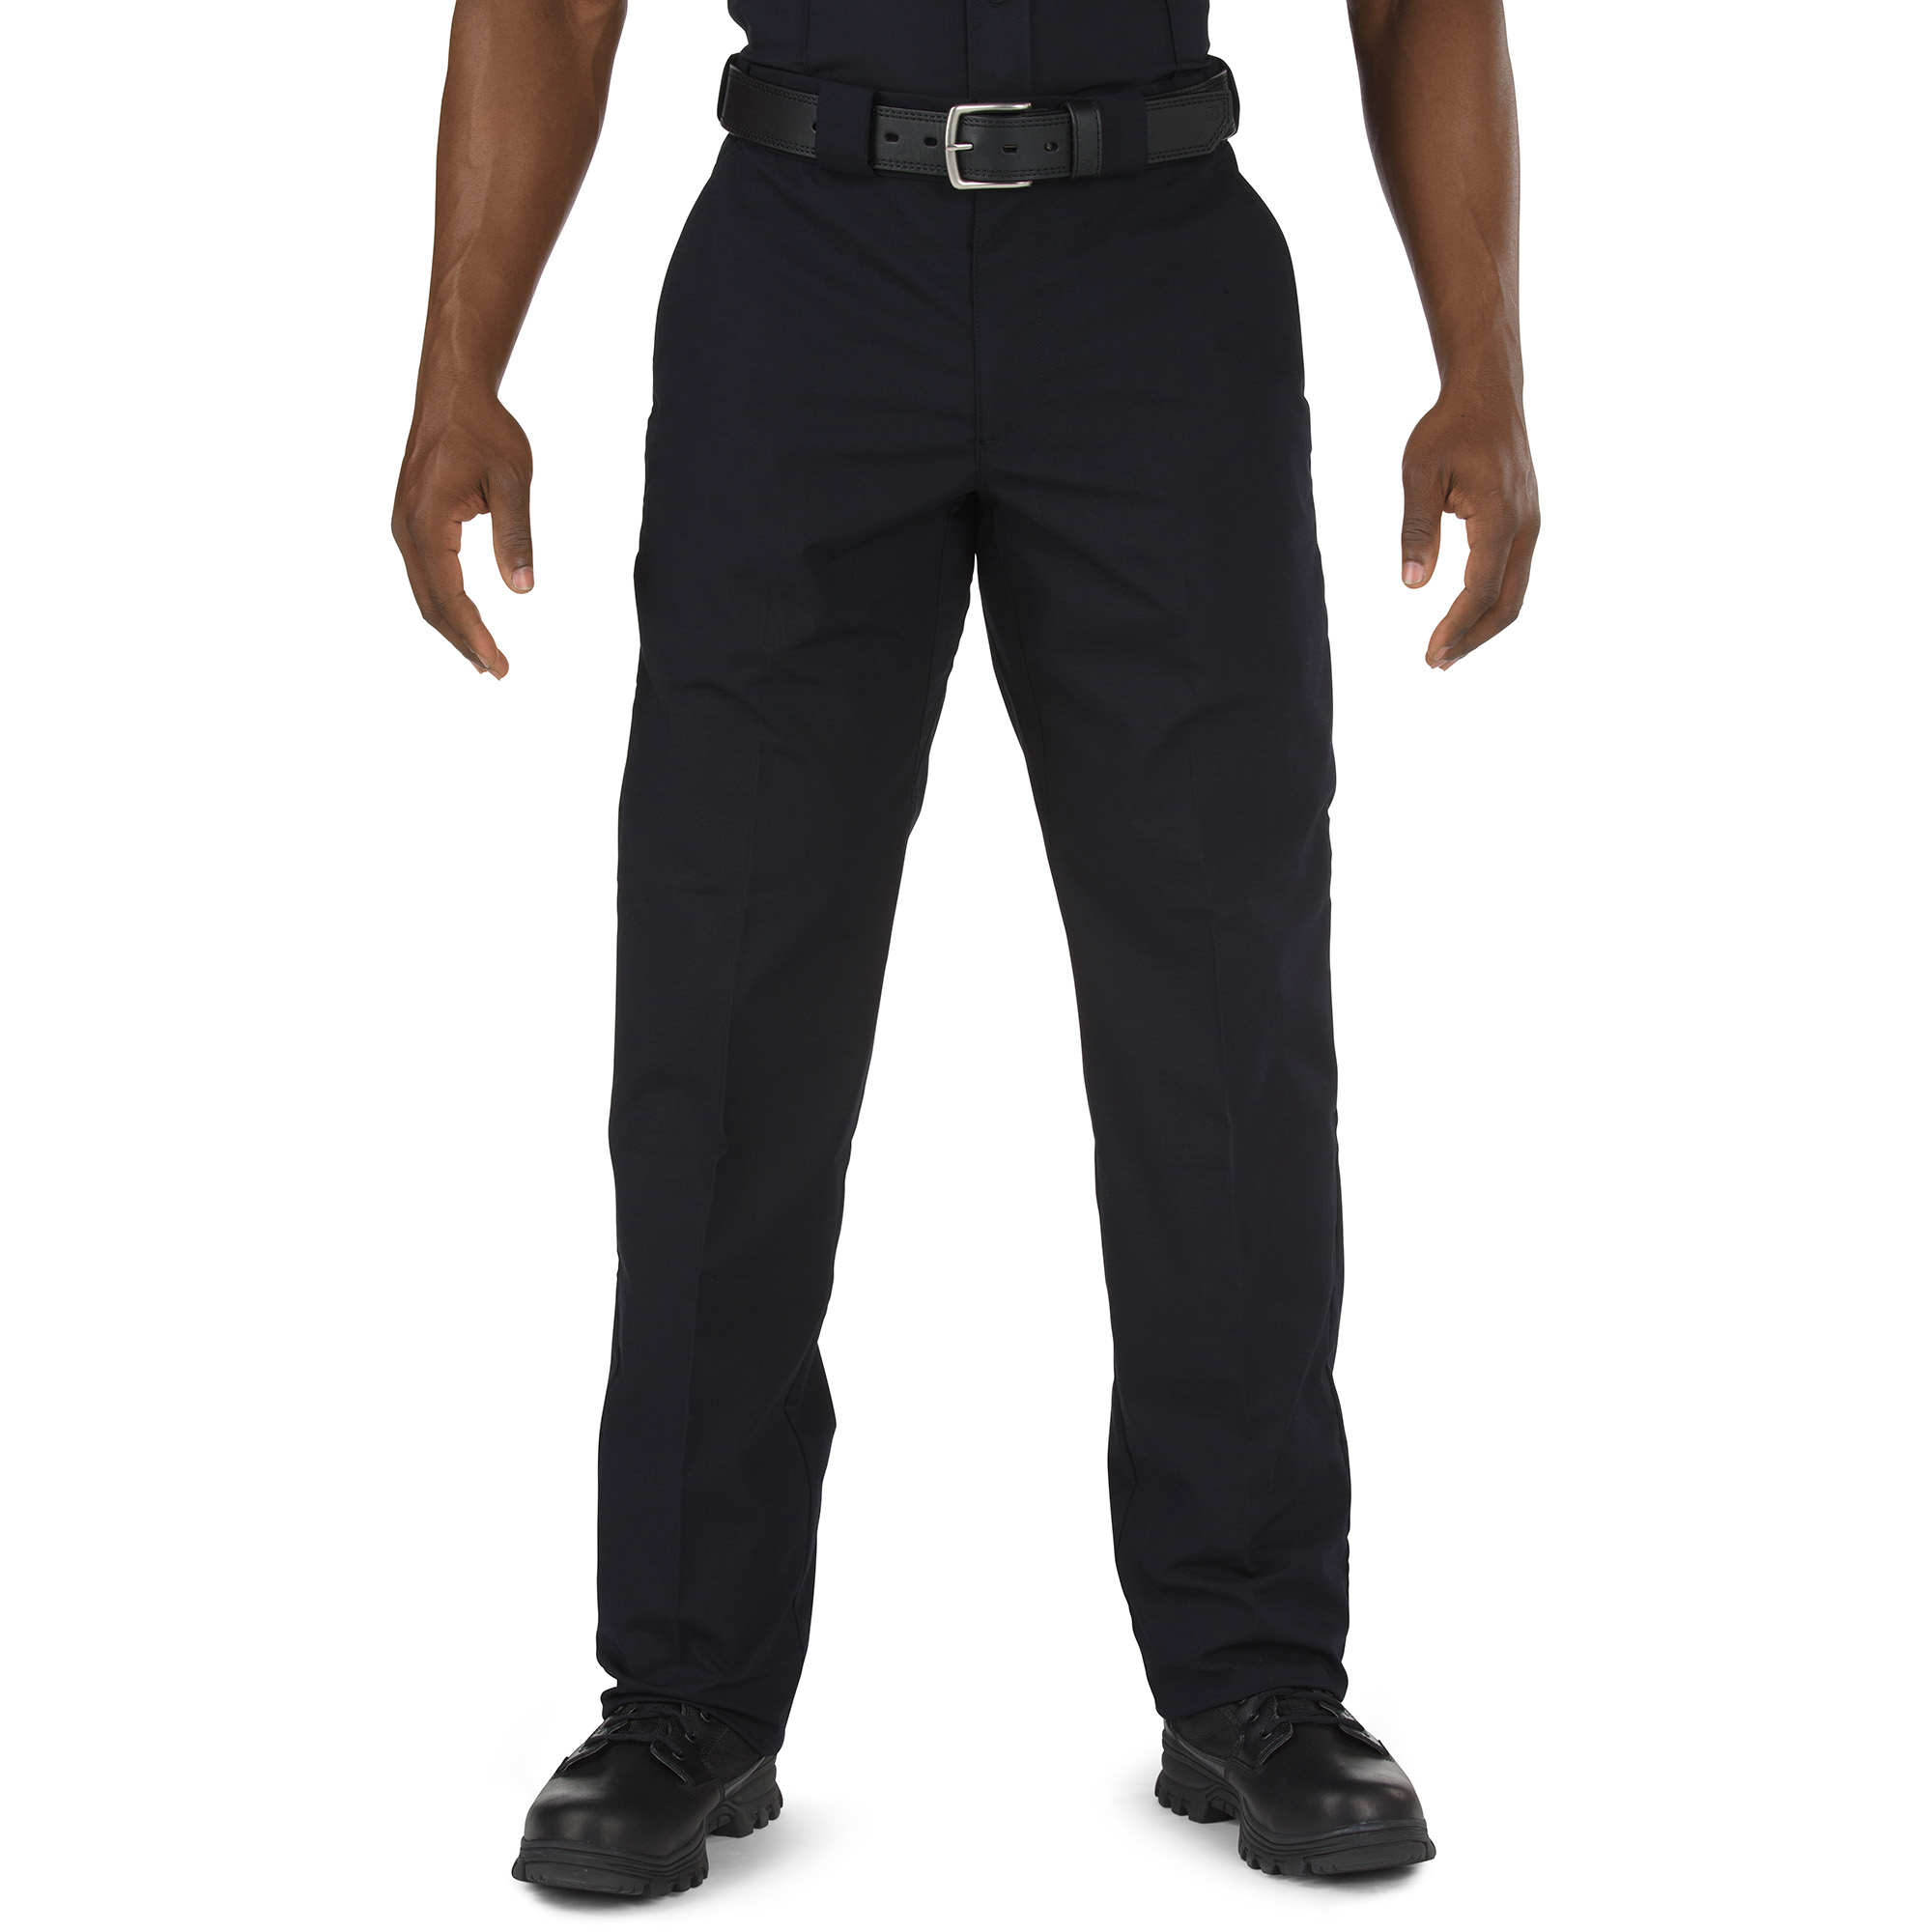 MenS 5.11 Strykeâ ¢ Class-A Pdu Pant From 5.11 Tactical-5.11 Tactical